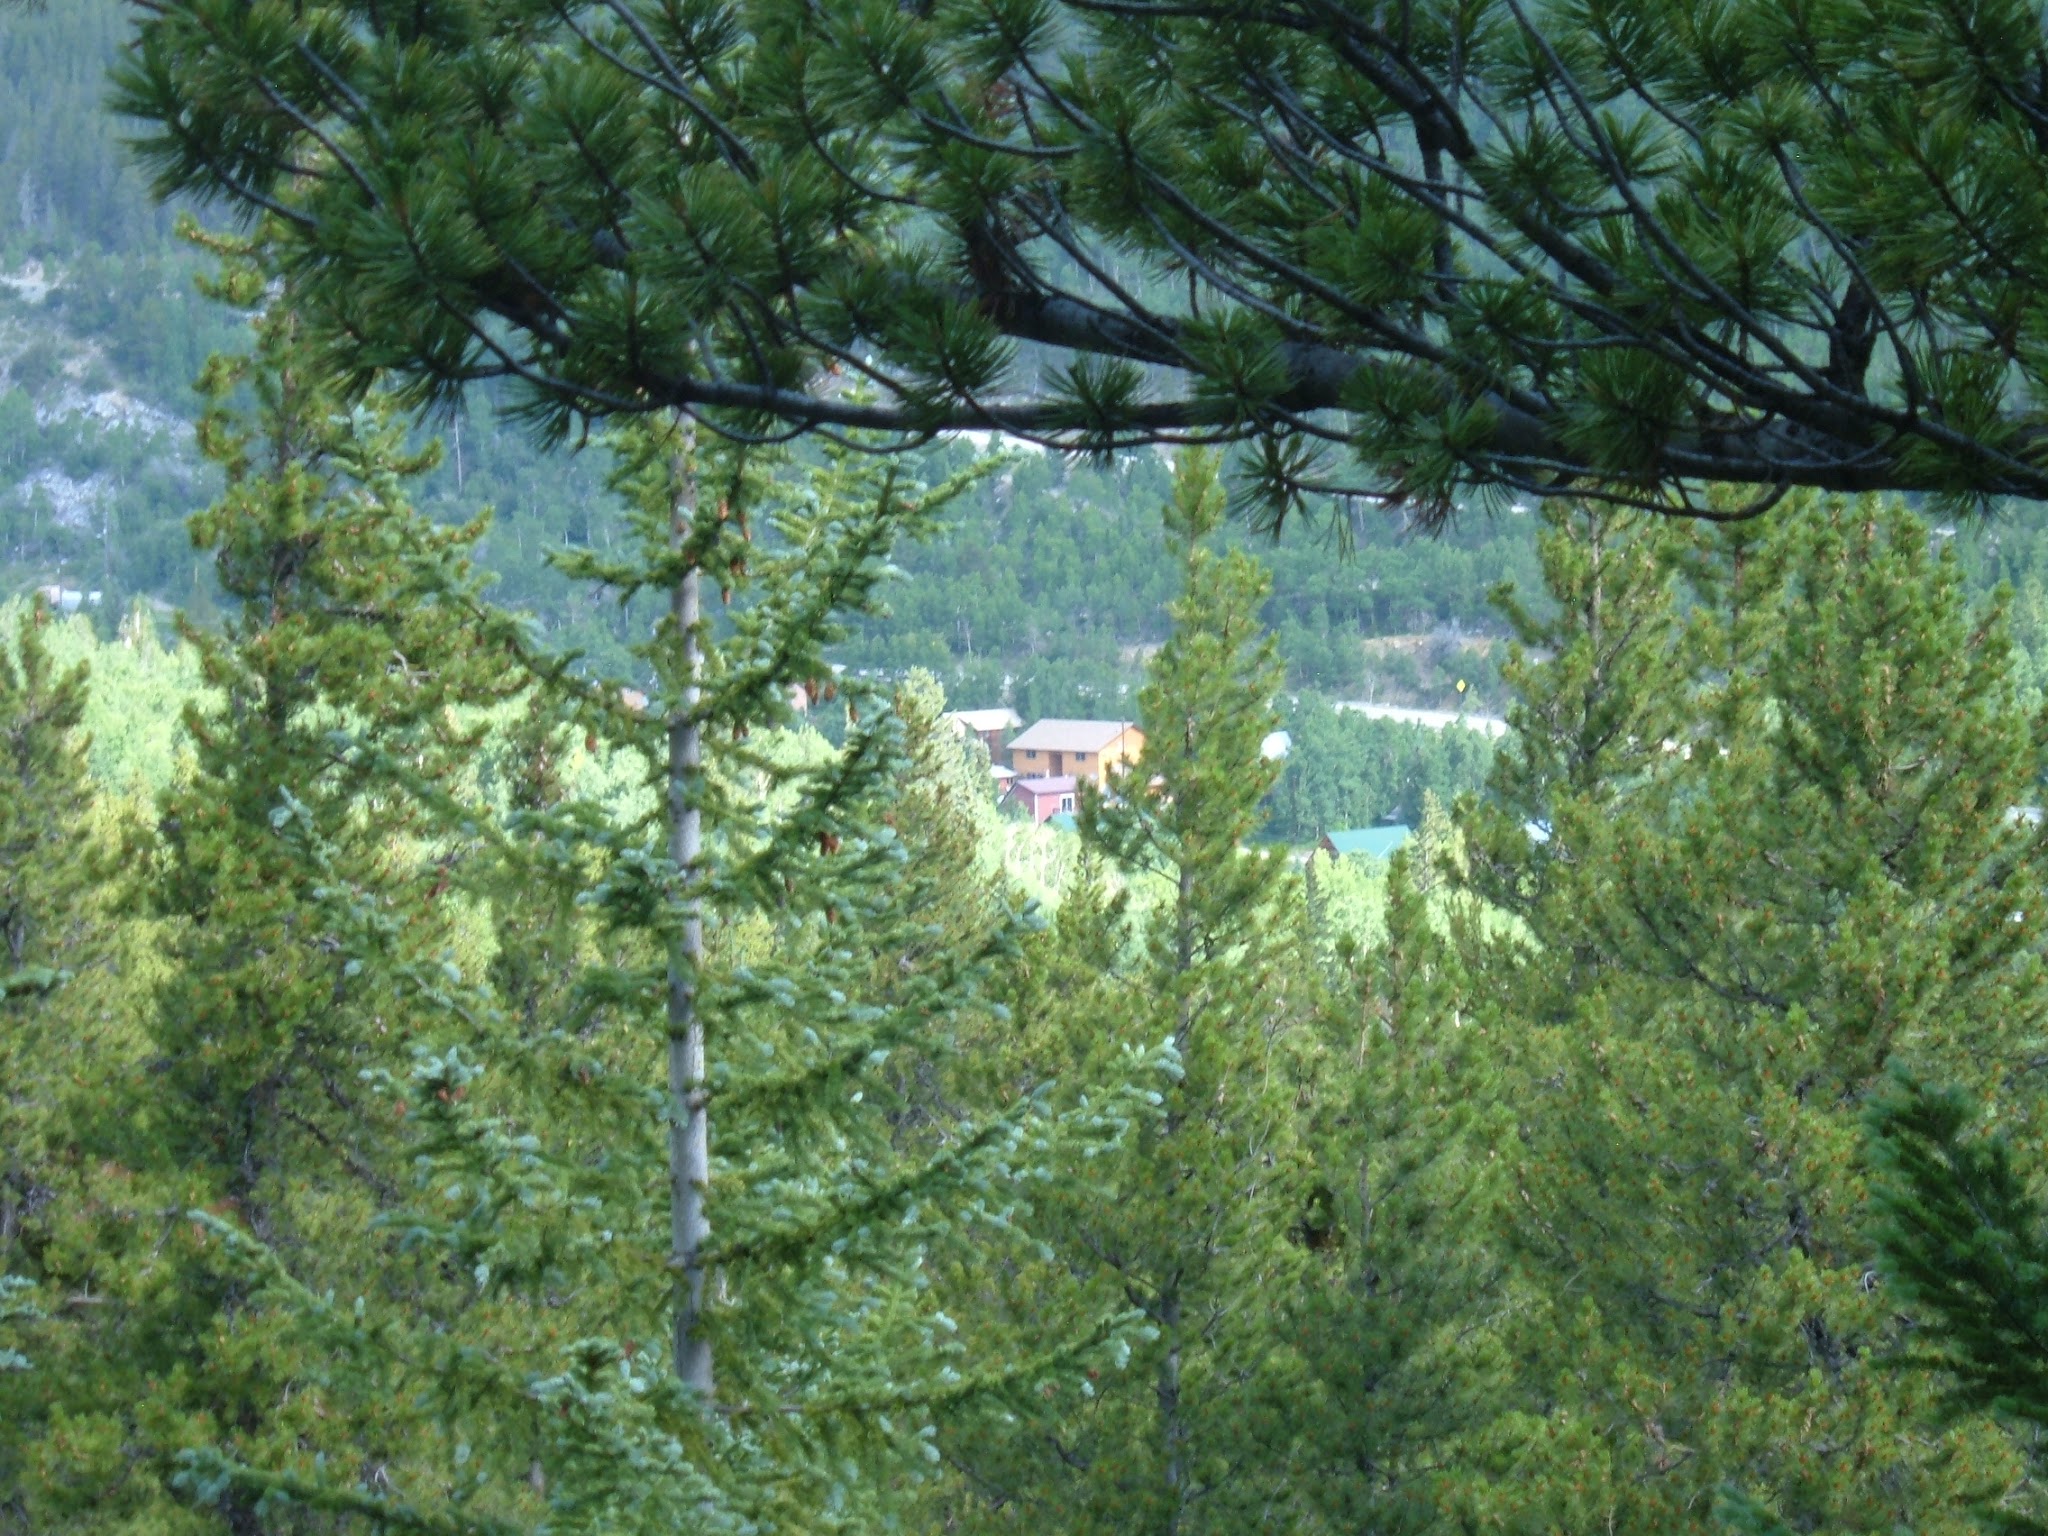 View of a 4-plex in the distance from a mountain side.